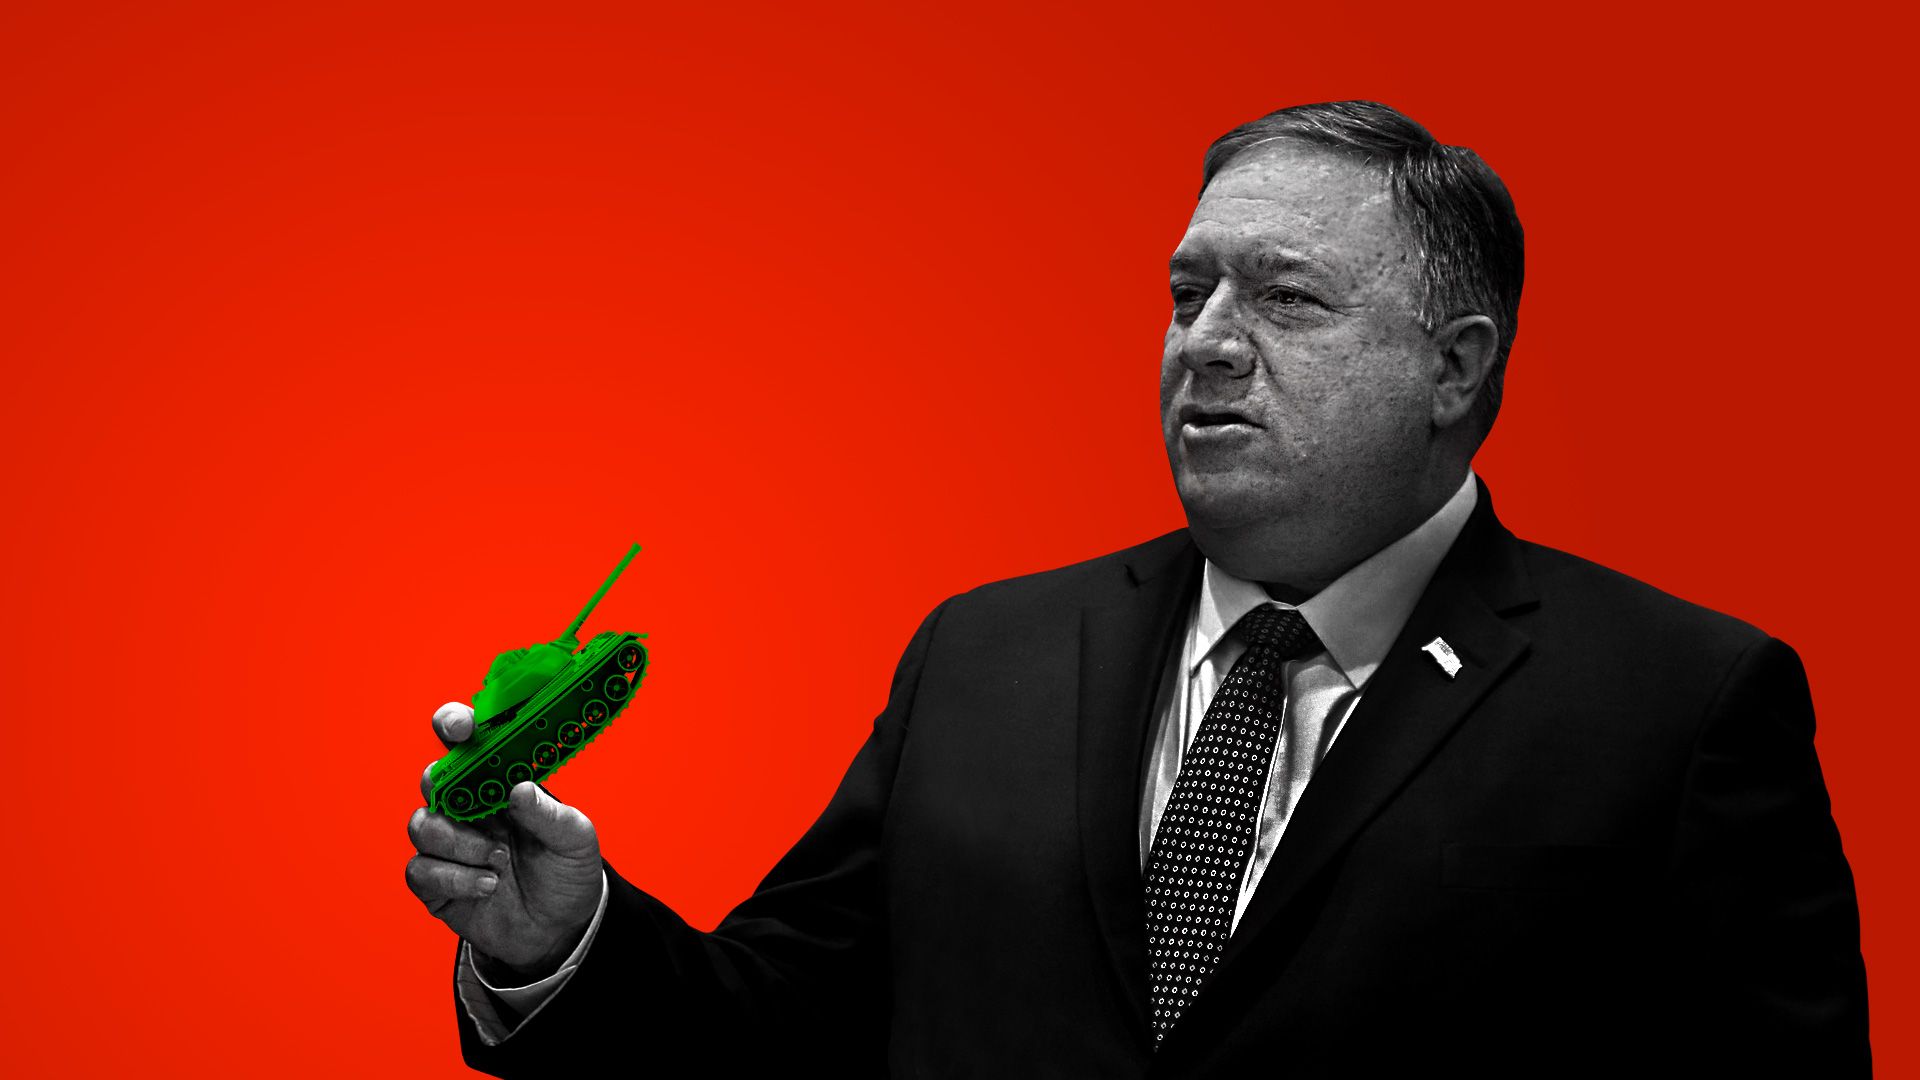 Mike Pompeo holding a miniature tank